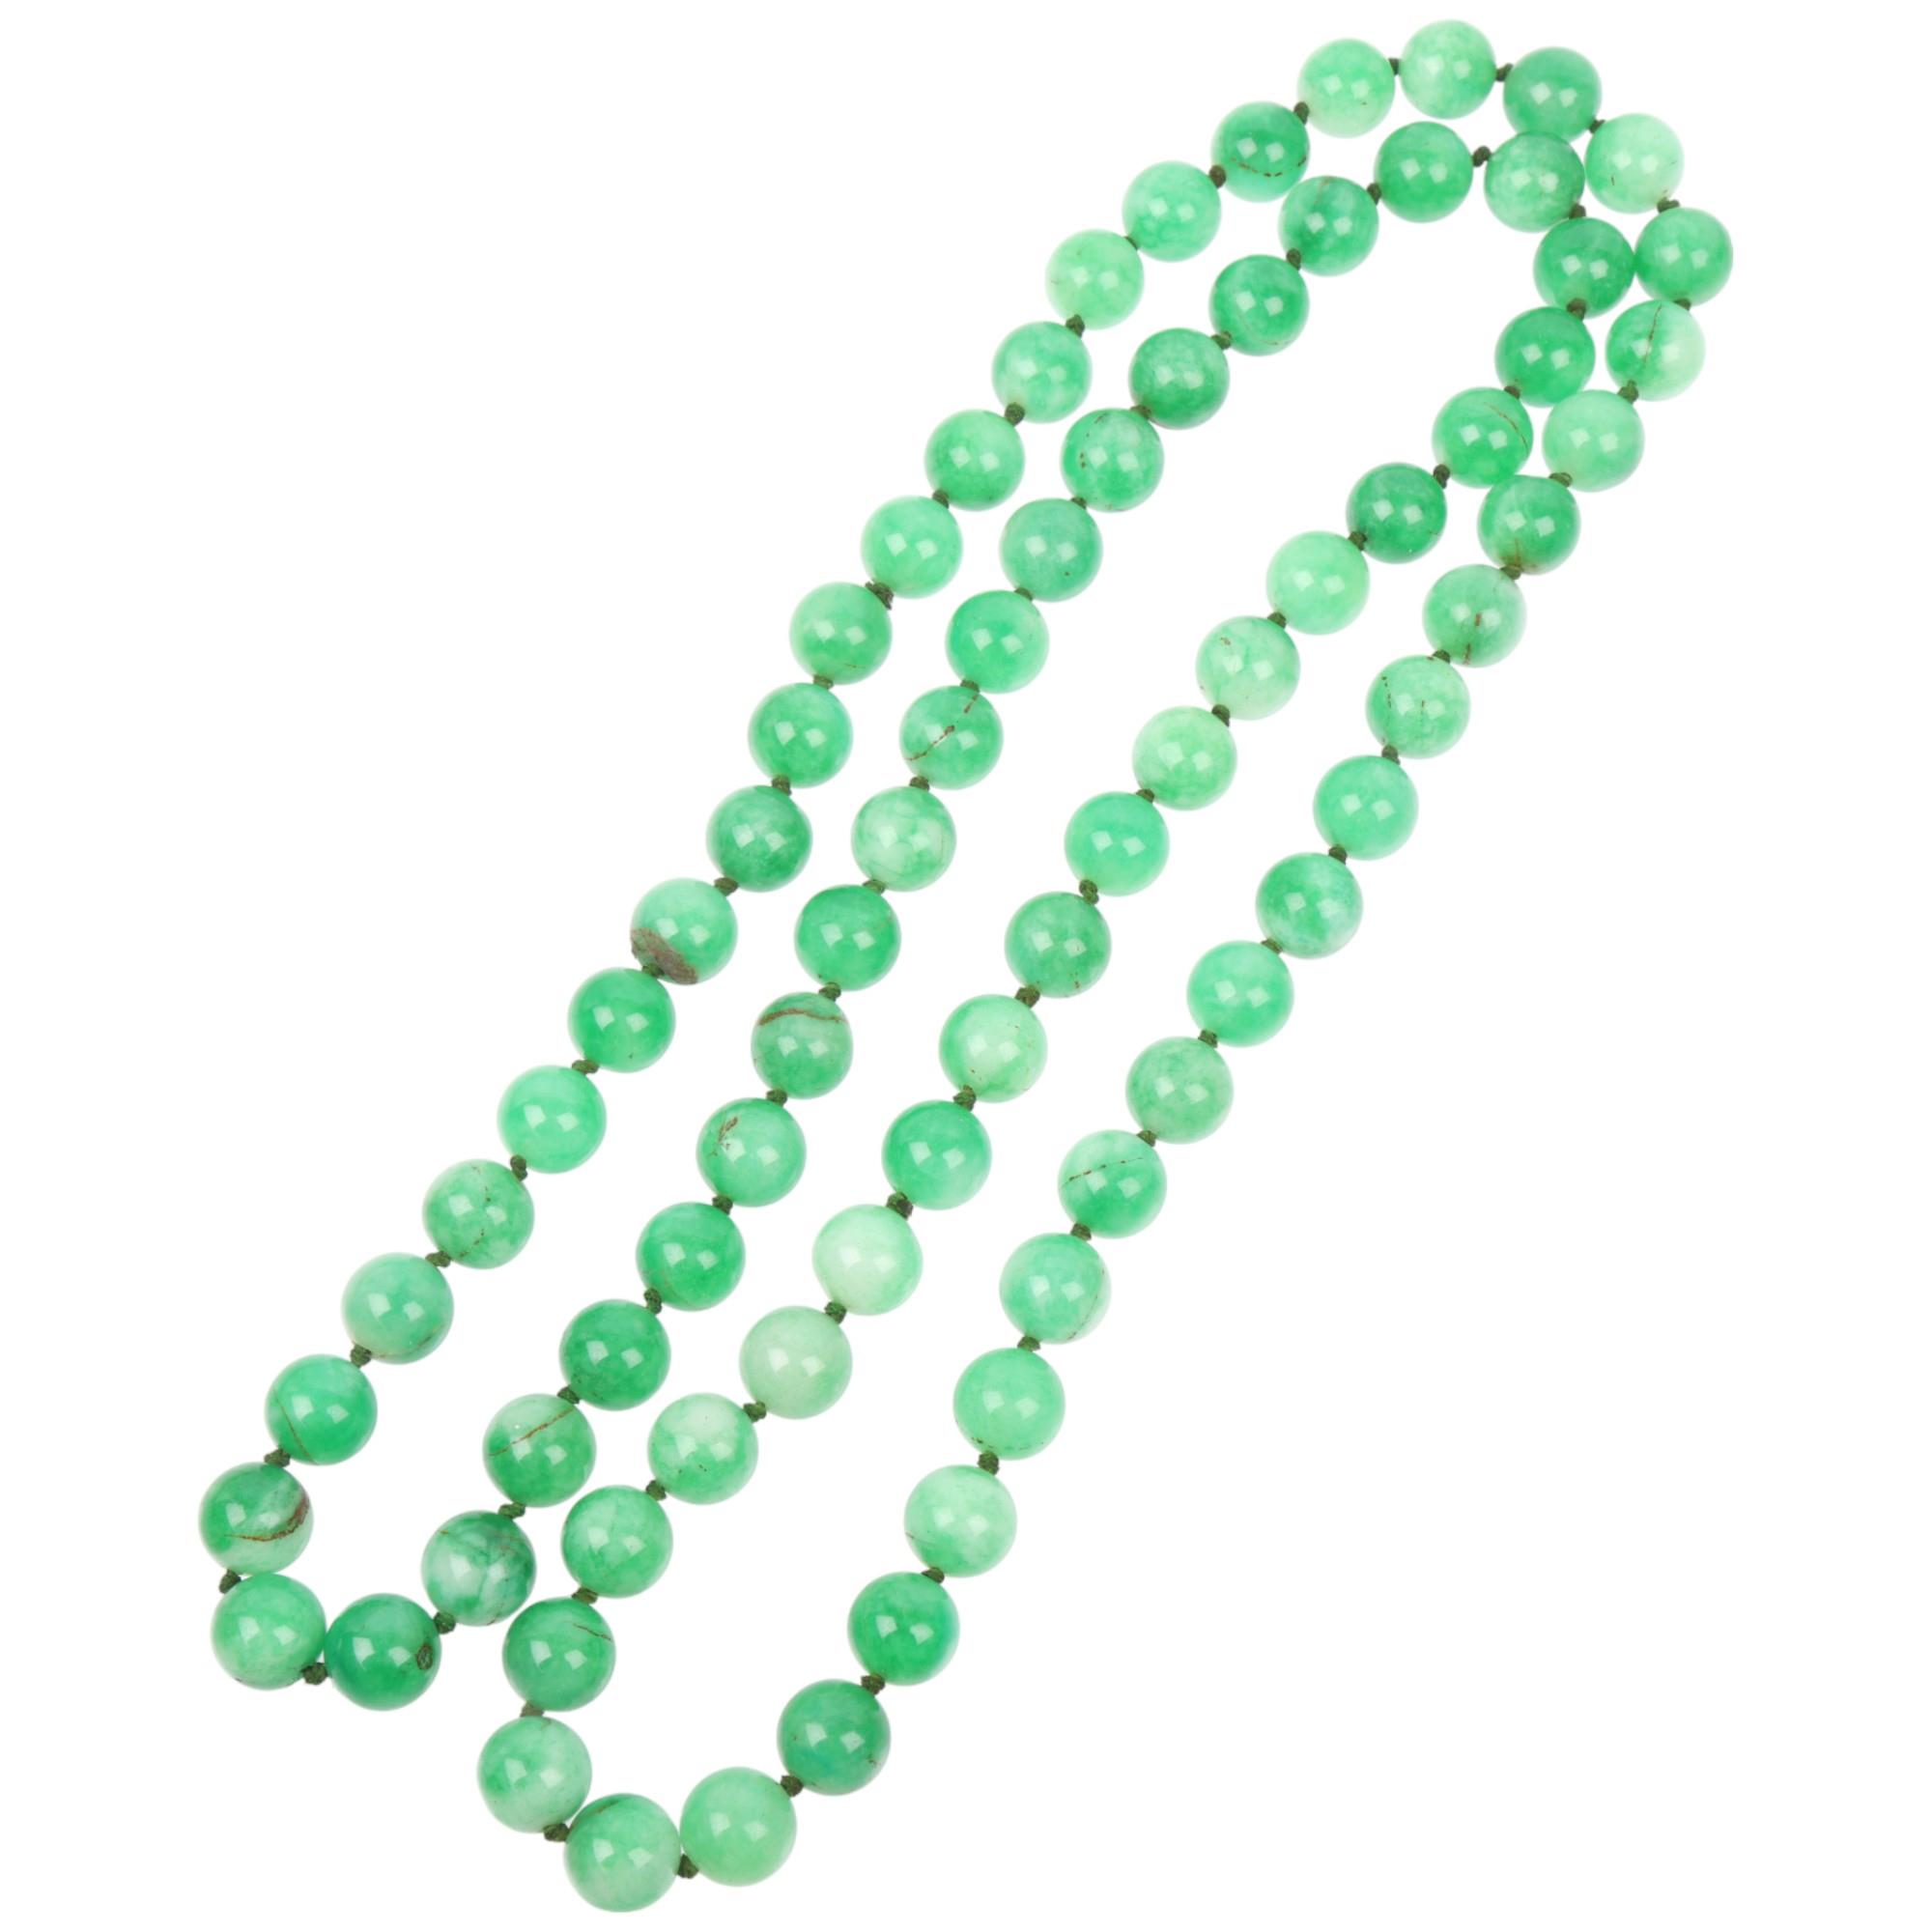 A long single-strand polished dyed quartz bead necklace, beads 12mm, necklace 96cm, 179.5g Condition